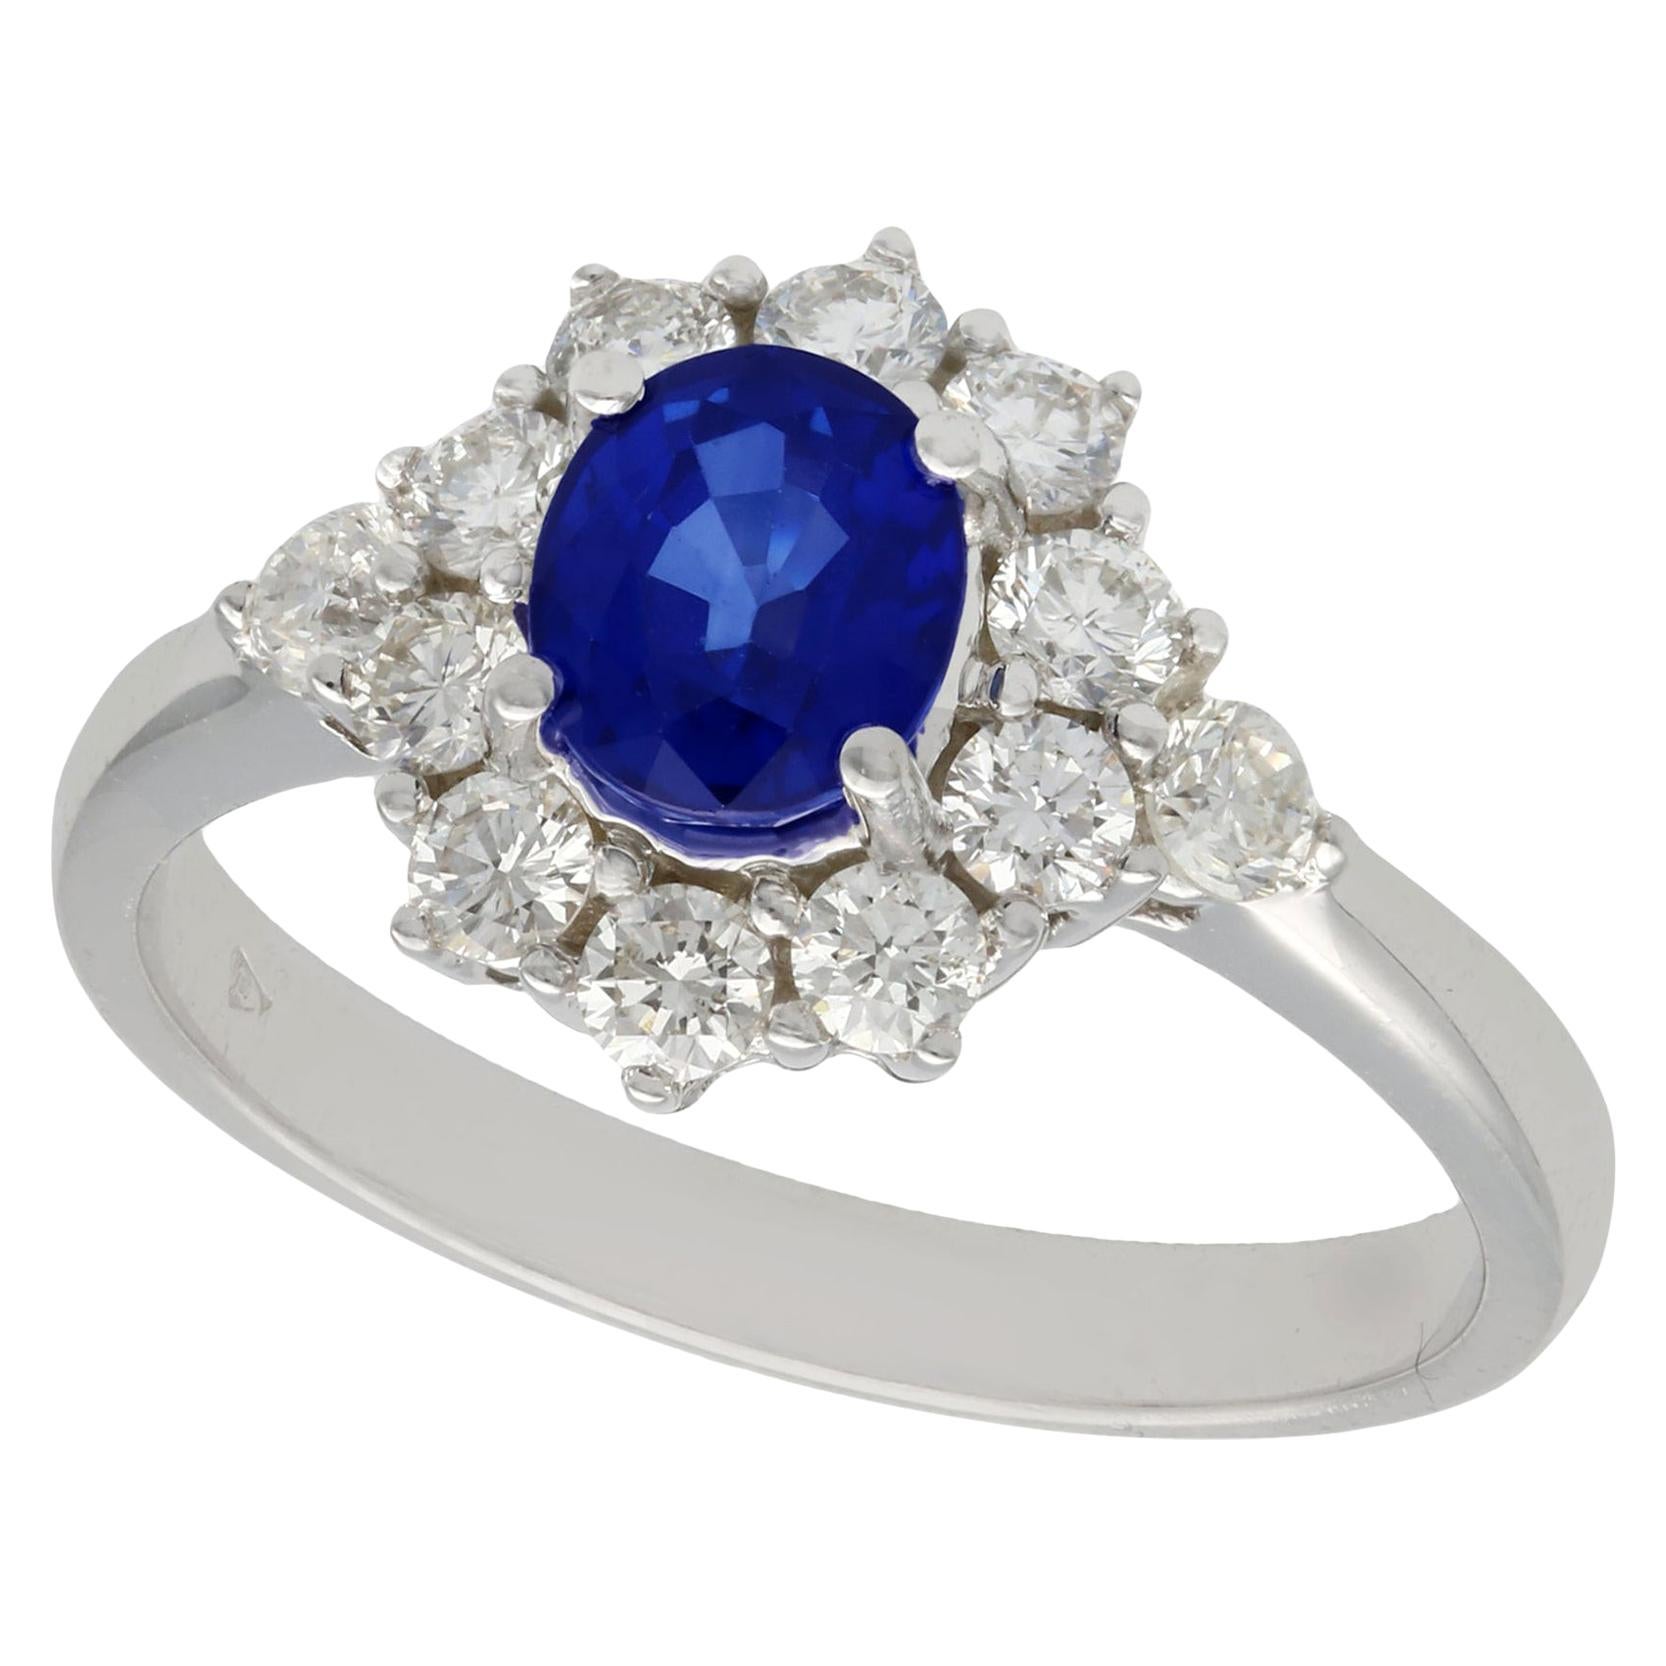 1970s Vintage 1.21 Carat Sapphire and Diamond White Gold Cocktail Ring